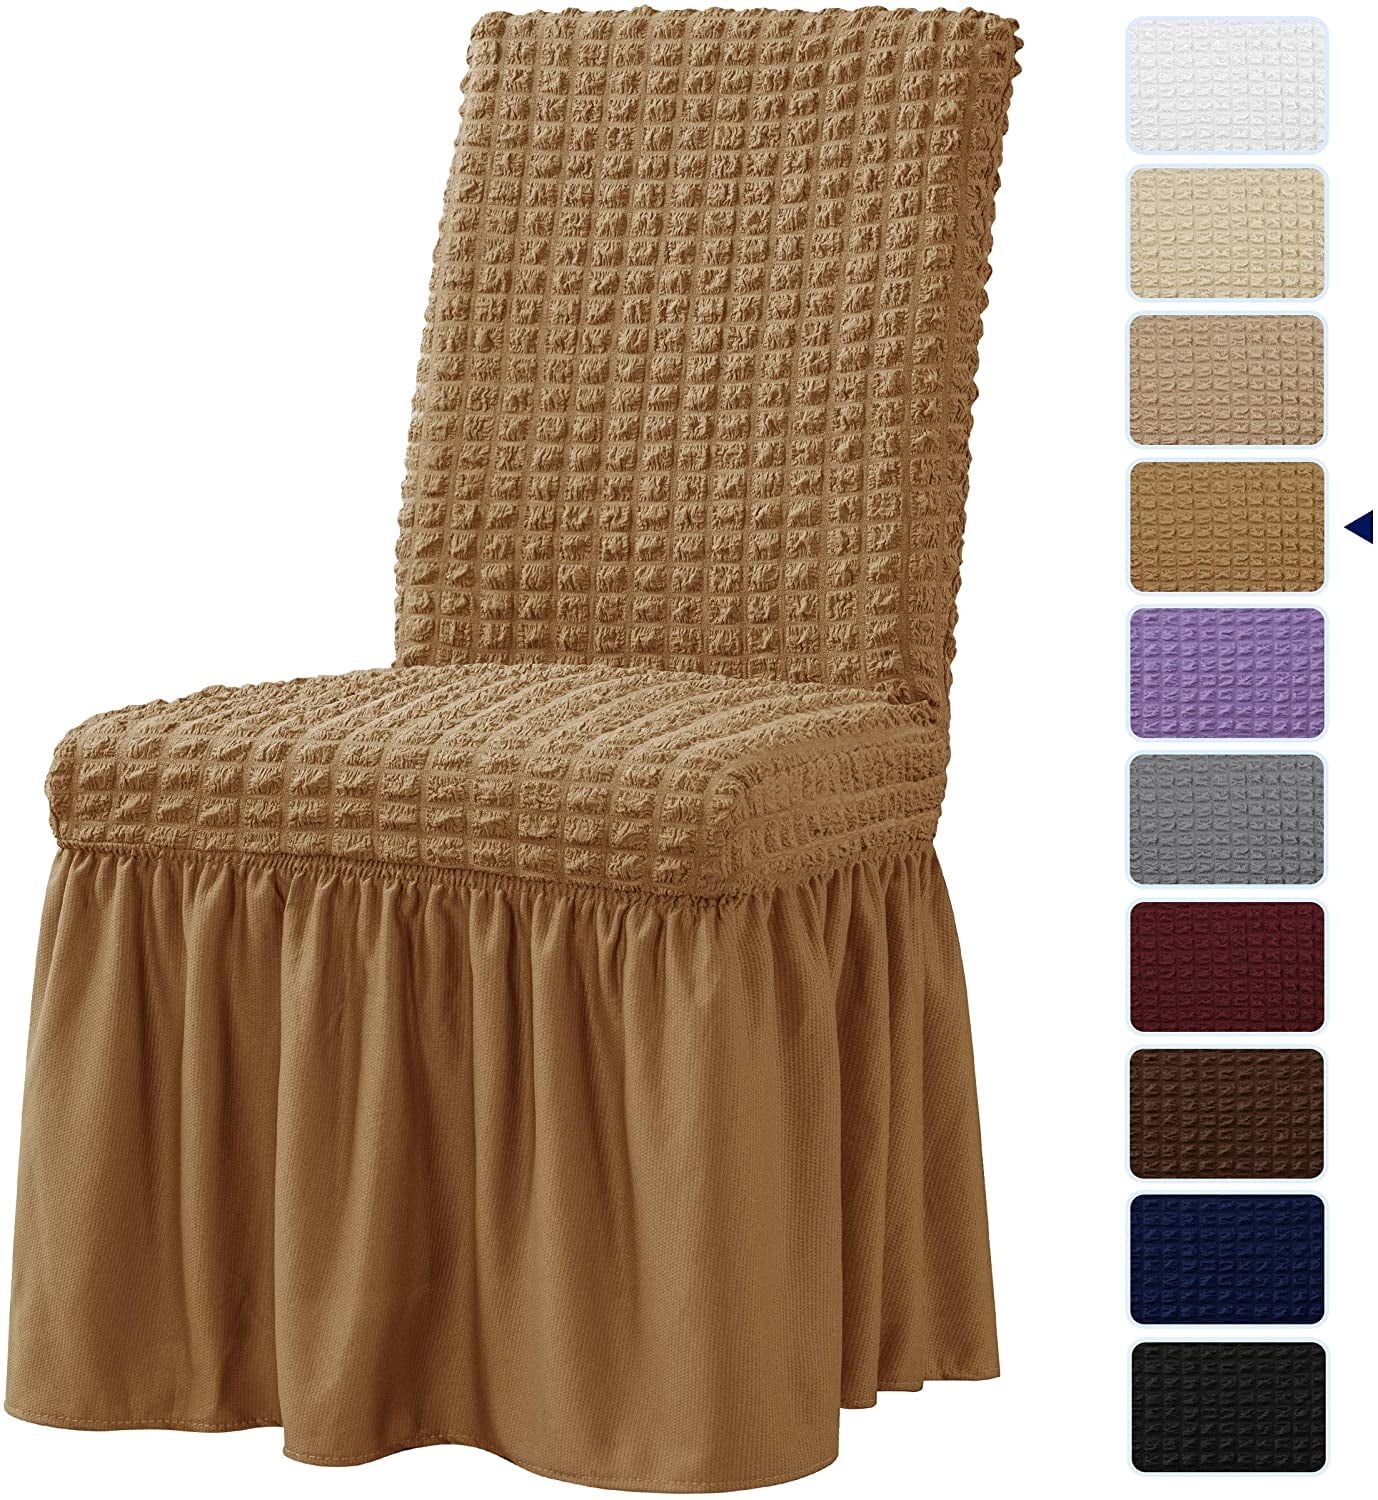 Subrtex Stretch 1-Piece Pleated Ruffled Skirt Dining Chair Slipcover (Set of 2, Almond) | Walmart (US)